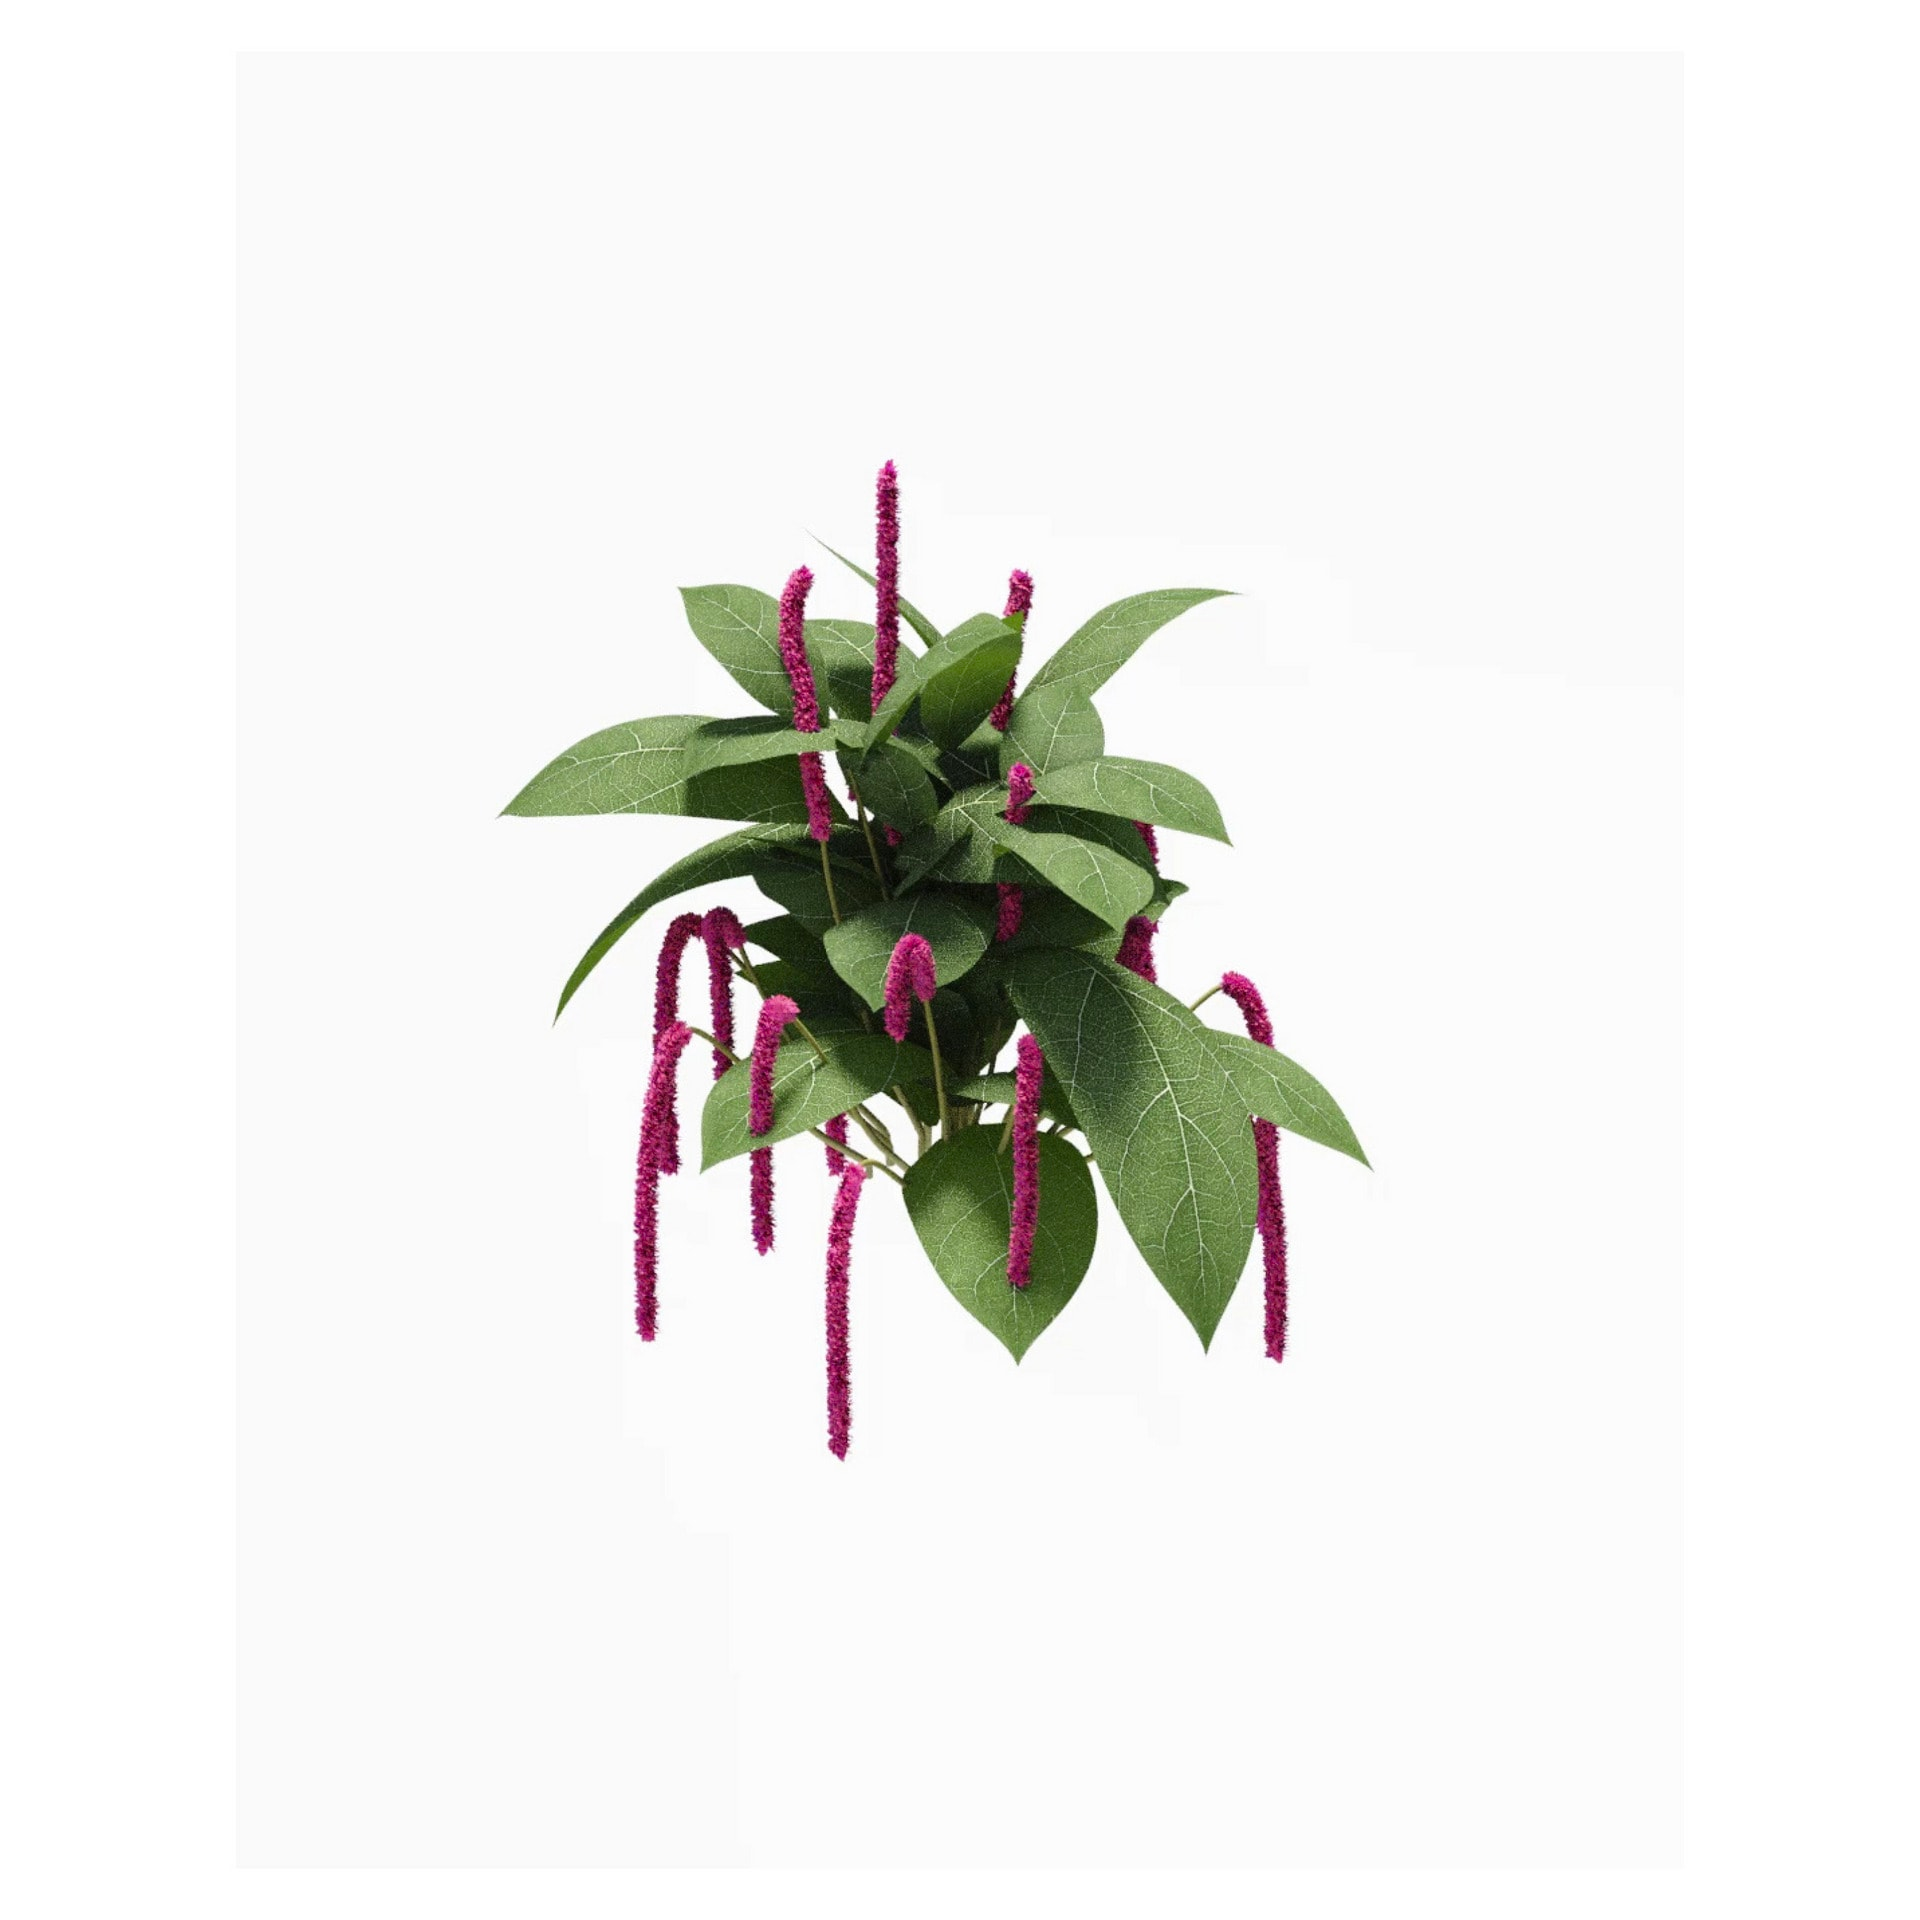 Image of a plant with green leaves and long dangling pink flowers, apparently floating on a white background.